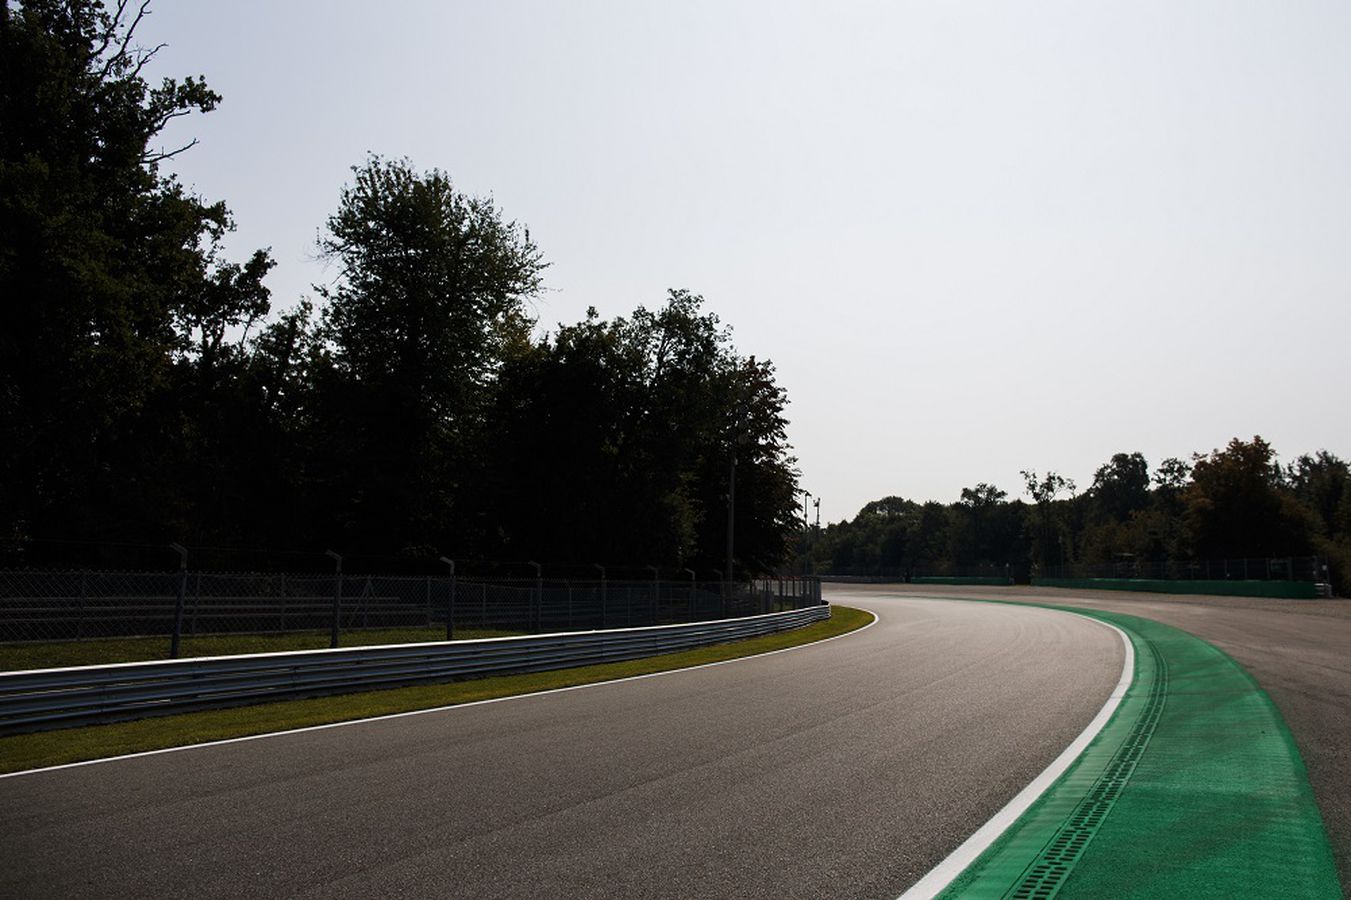 Monza's Parabolica is one of the finest corners on the F1 calendar